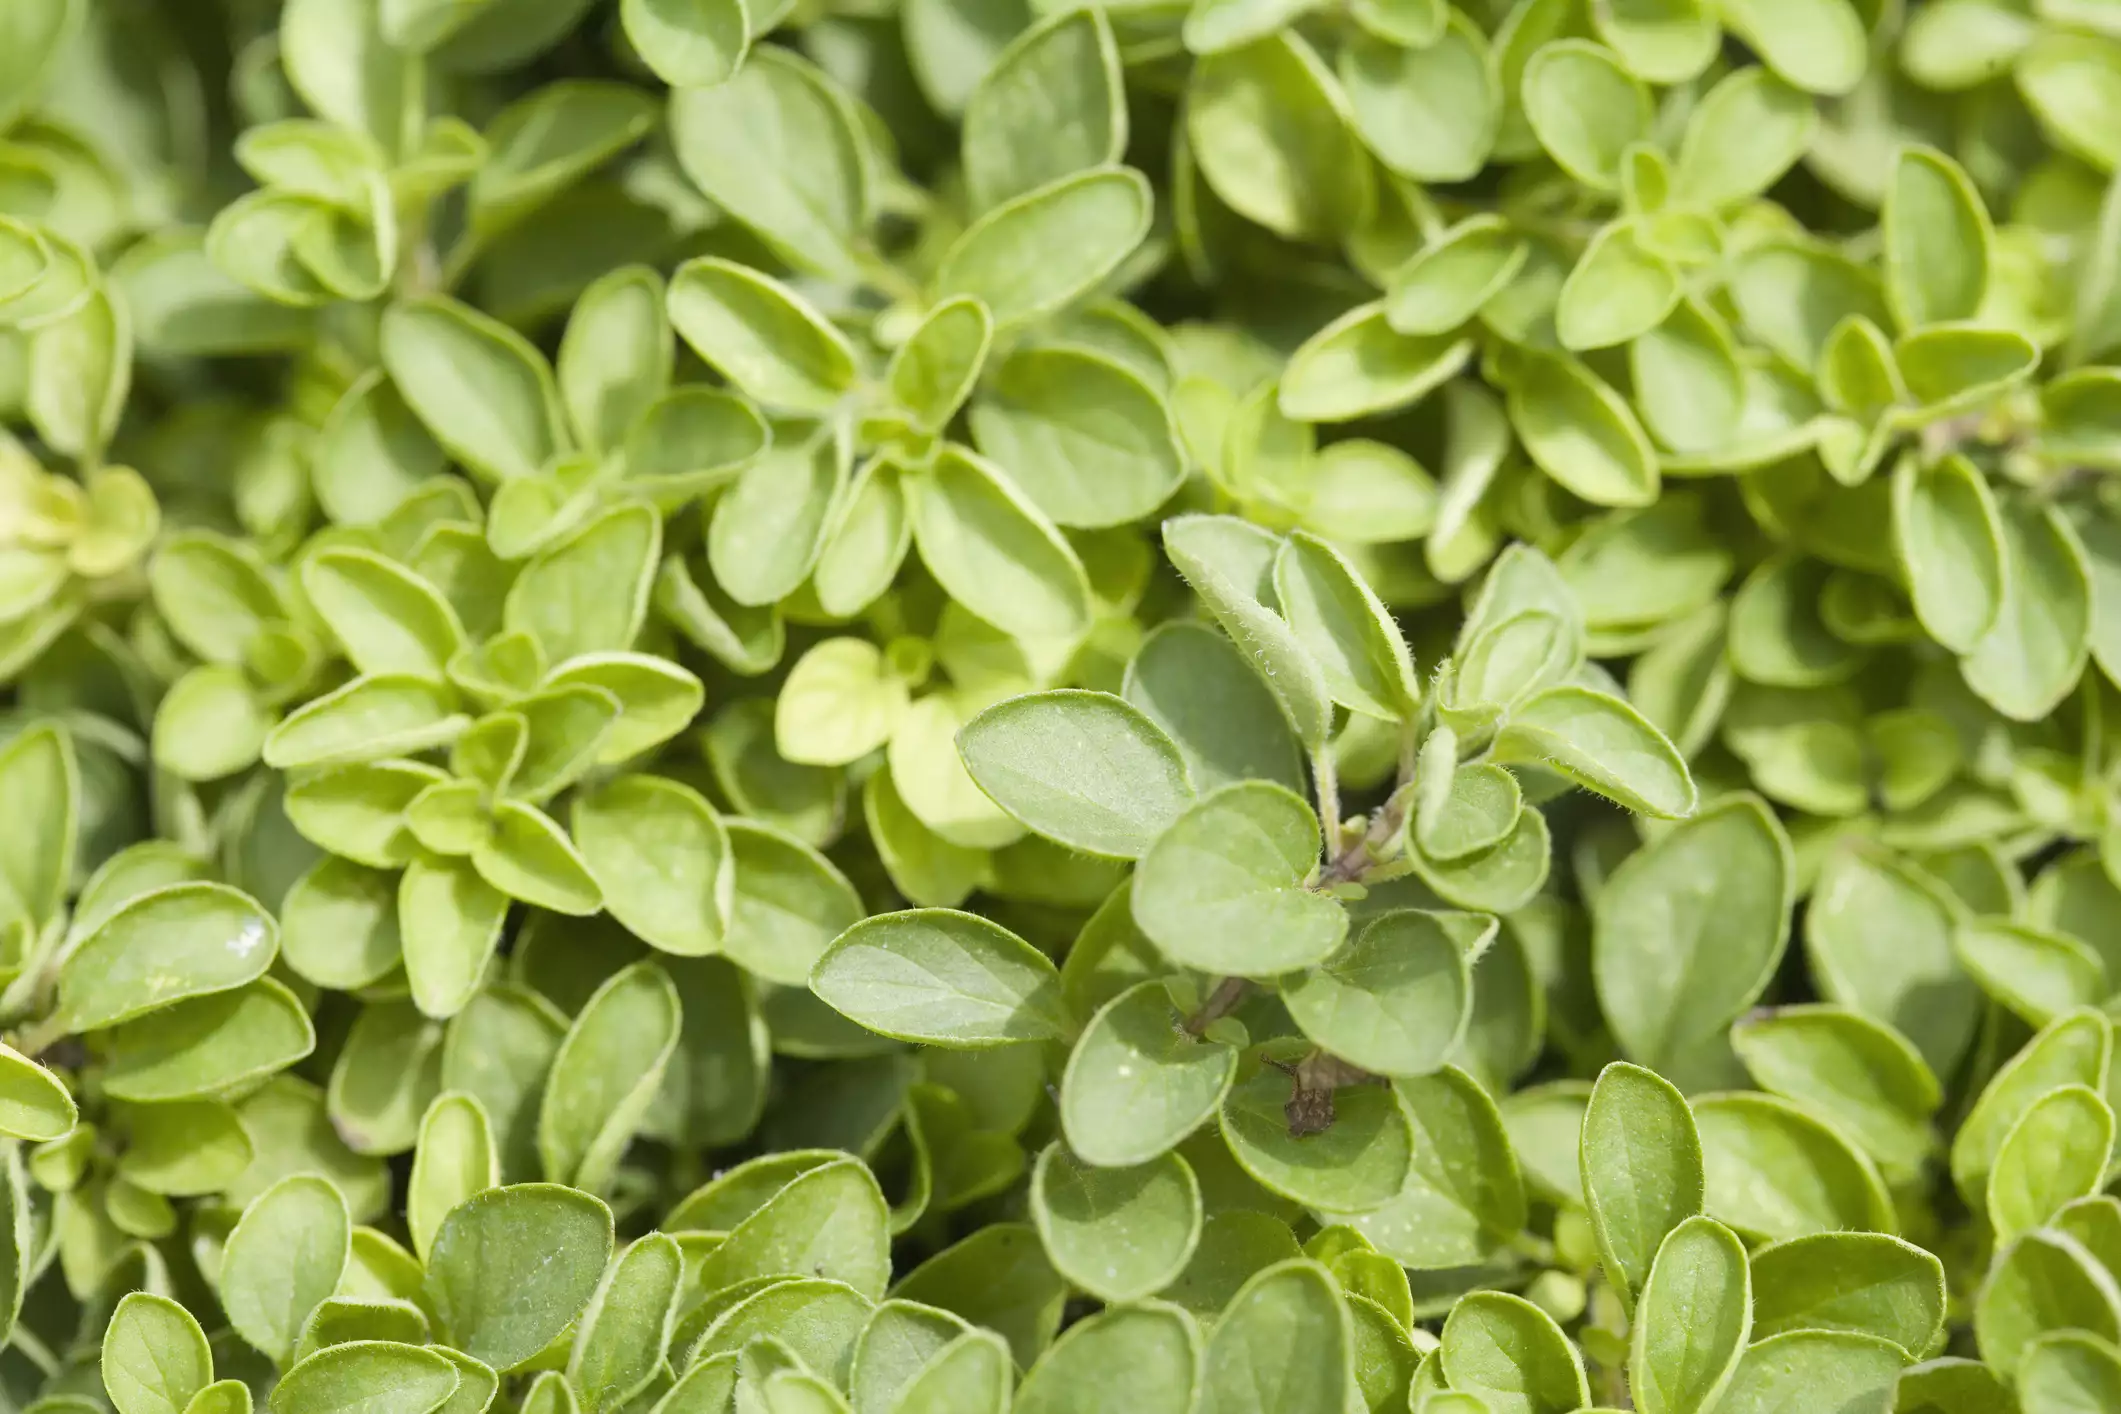 A patch of oregano plants growing closely together.